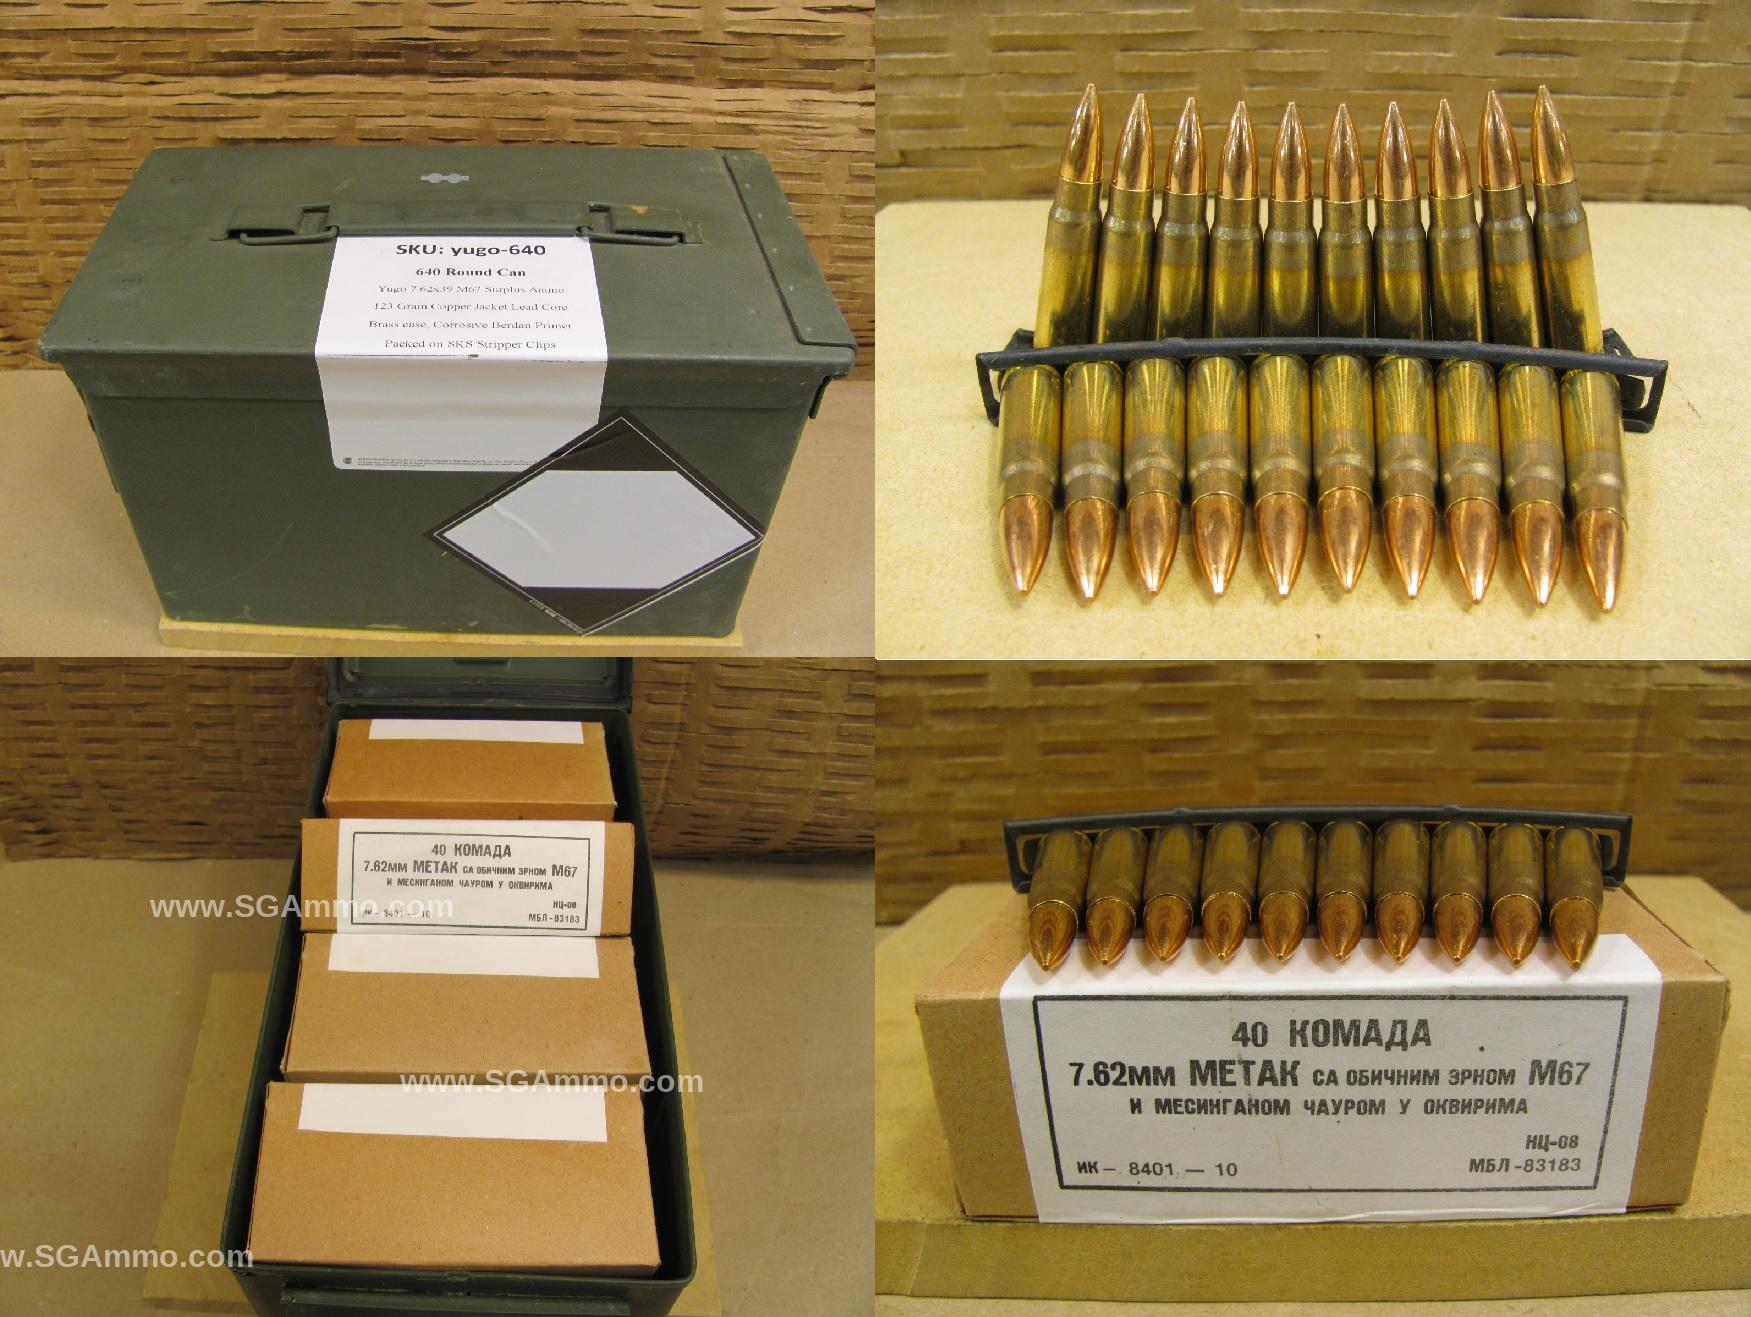 640 Round Ammo Can - 7.62x39 FMJ Yugo Surplus Non-Magnetic M67 Ammo on Stripper Clips Packed in M2A1 or M2A2 Canister - MFG 1960s-1990s